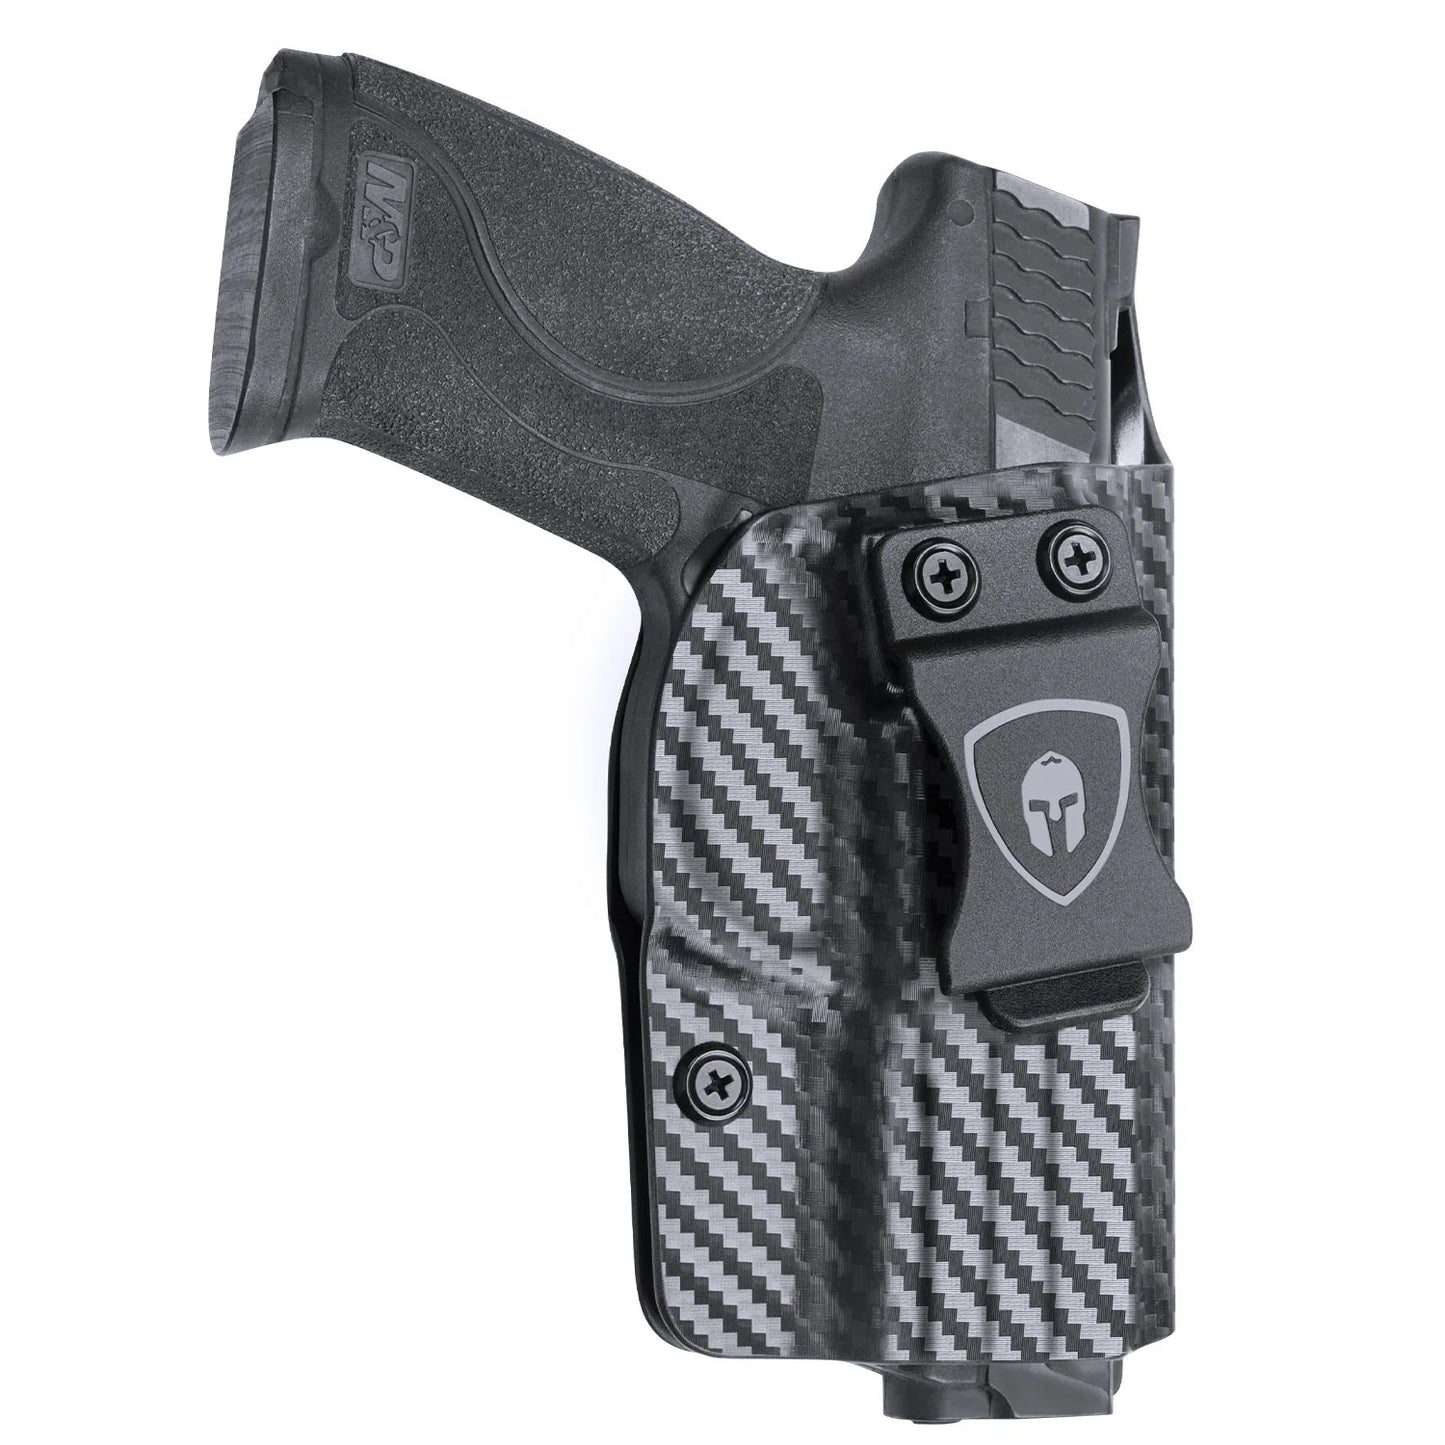 Carbon Fiber Kydex IWB Holster | Smith&Wesson M&P / M&P M2.0 / 9 / .40 / Compact&Full Size